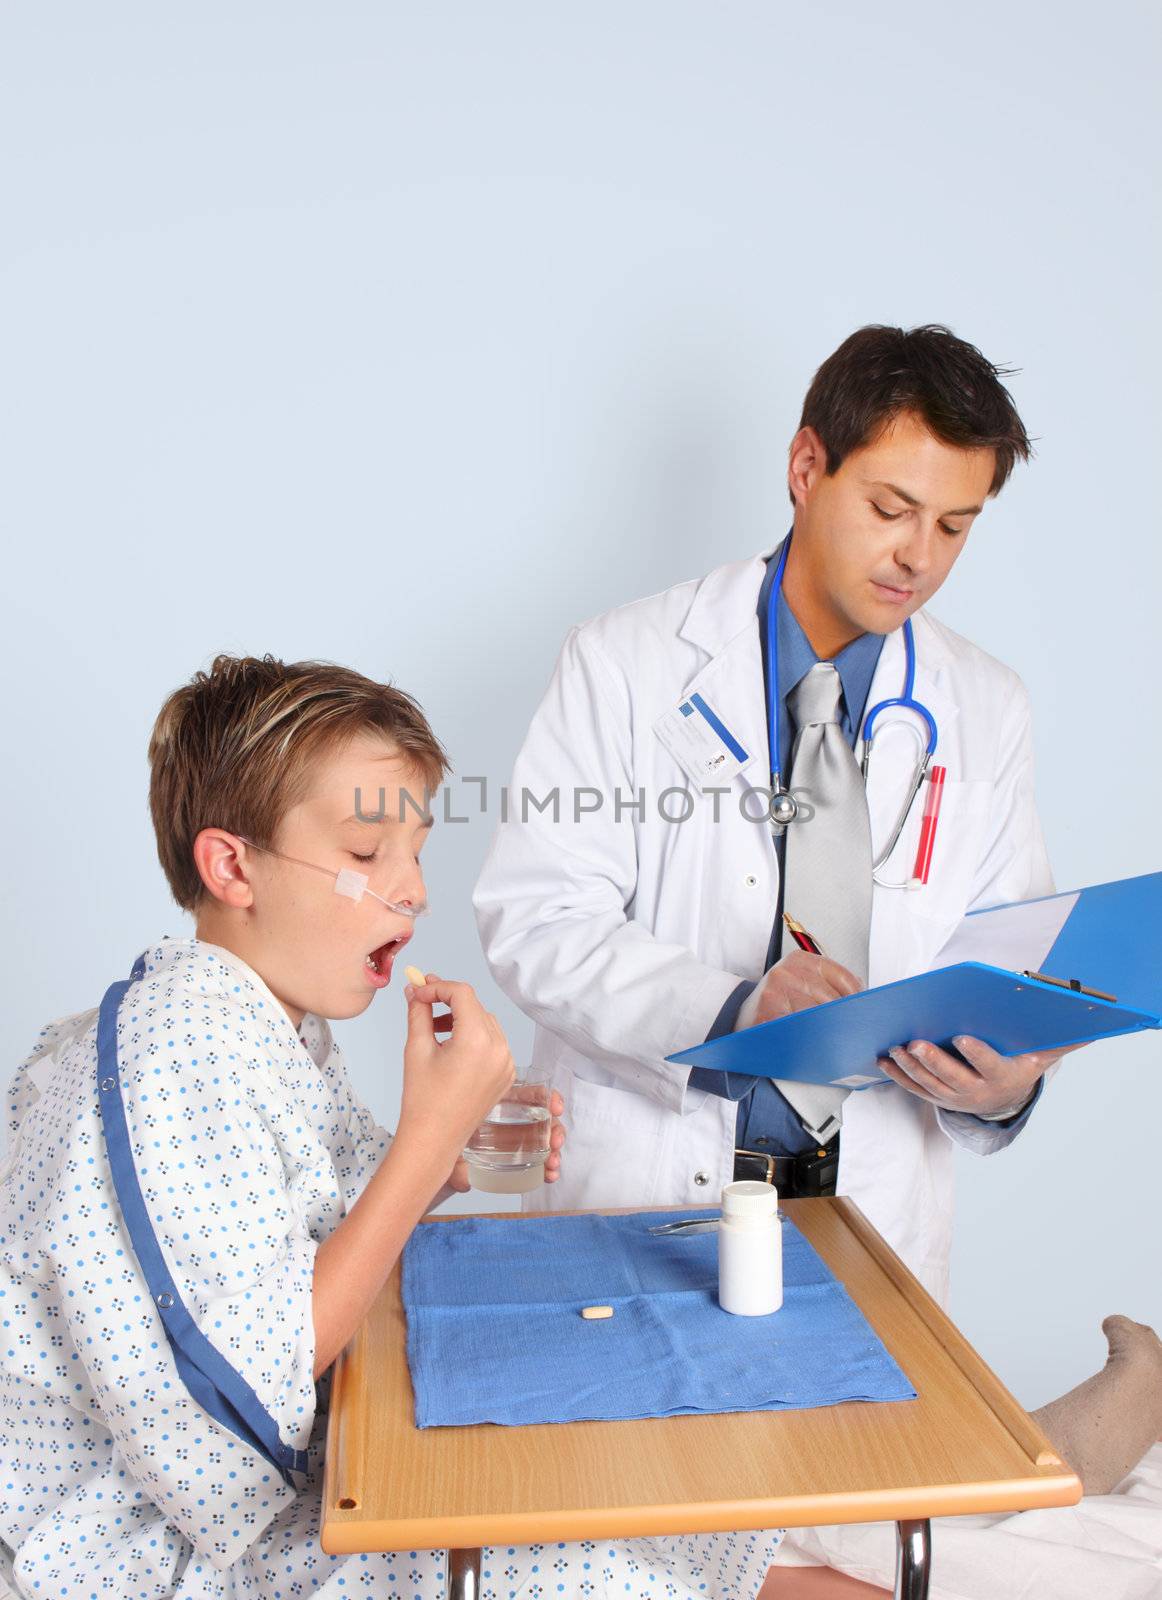 A doctor gives a young patient some medication and updates the patient medical record. No extra release required for ID badge.